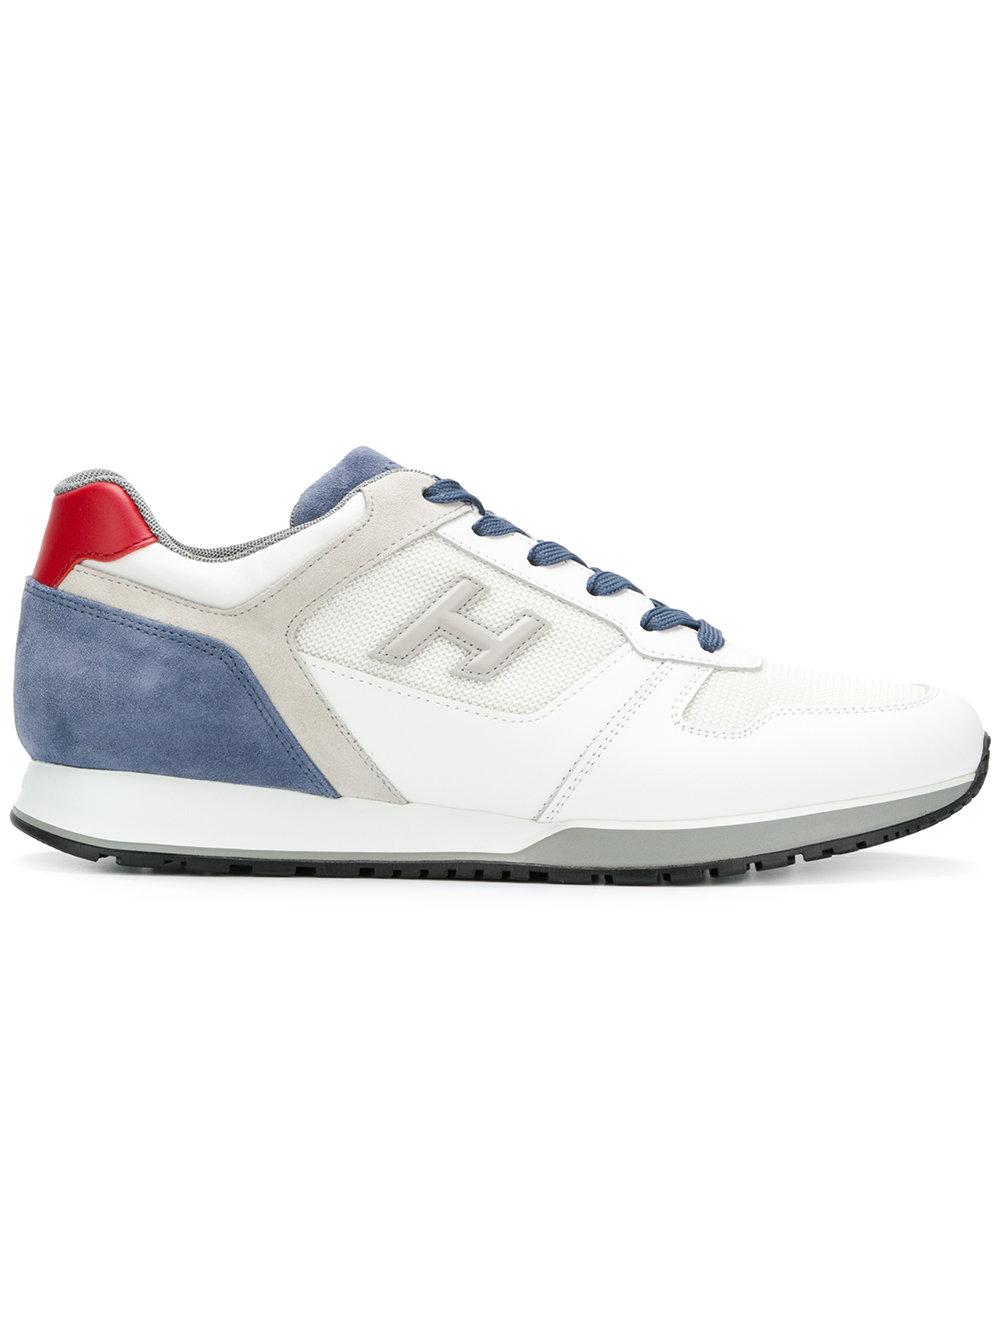 Hogan H321 White, Blue And Grey Leather And Suede Sneaker | ModeSens